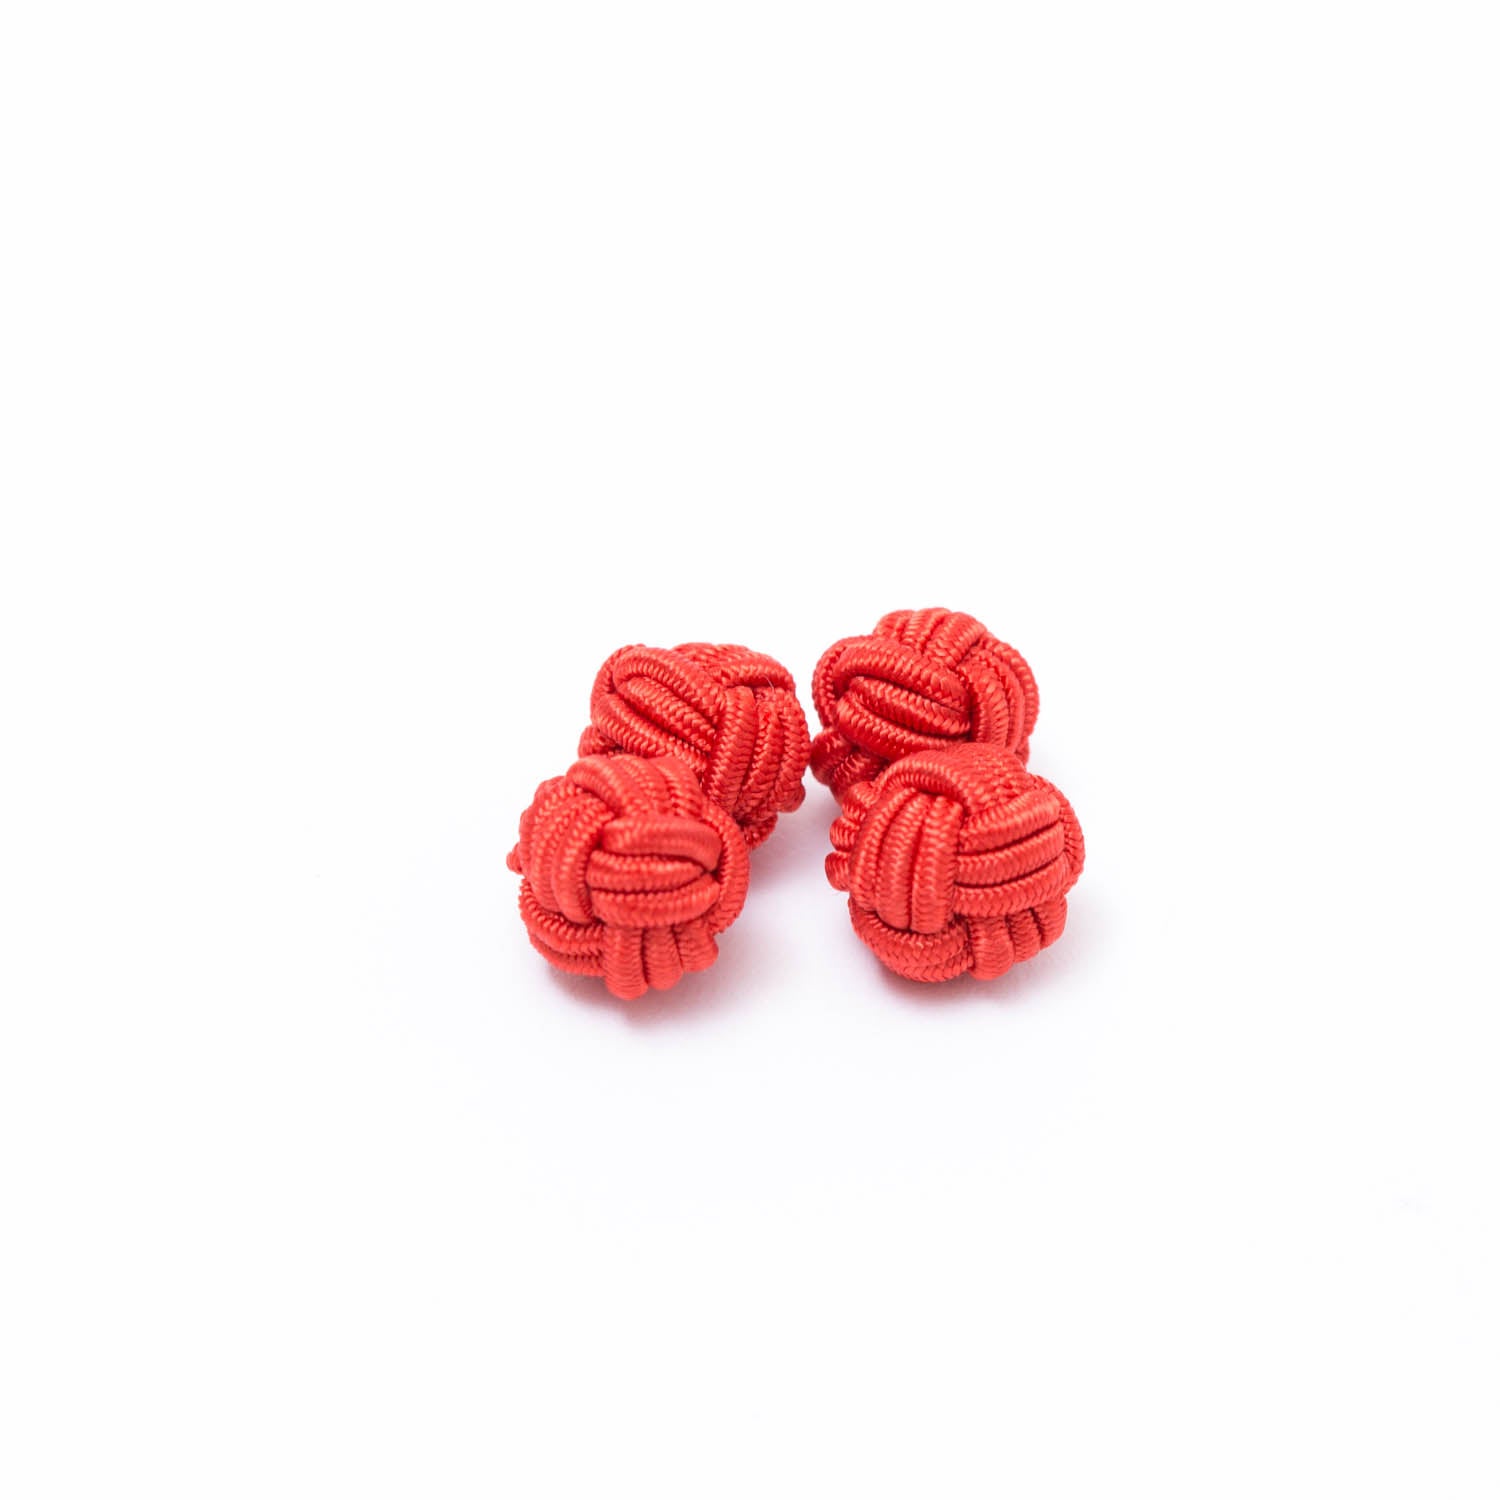 Solid Knot Cuff Links